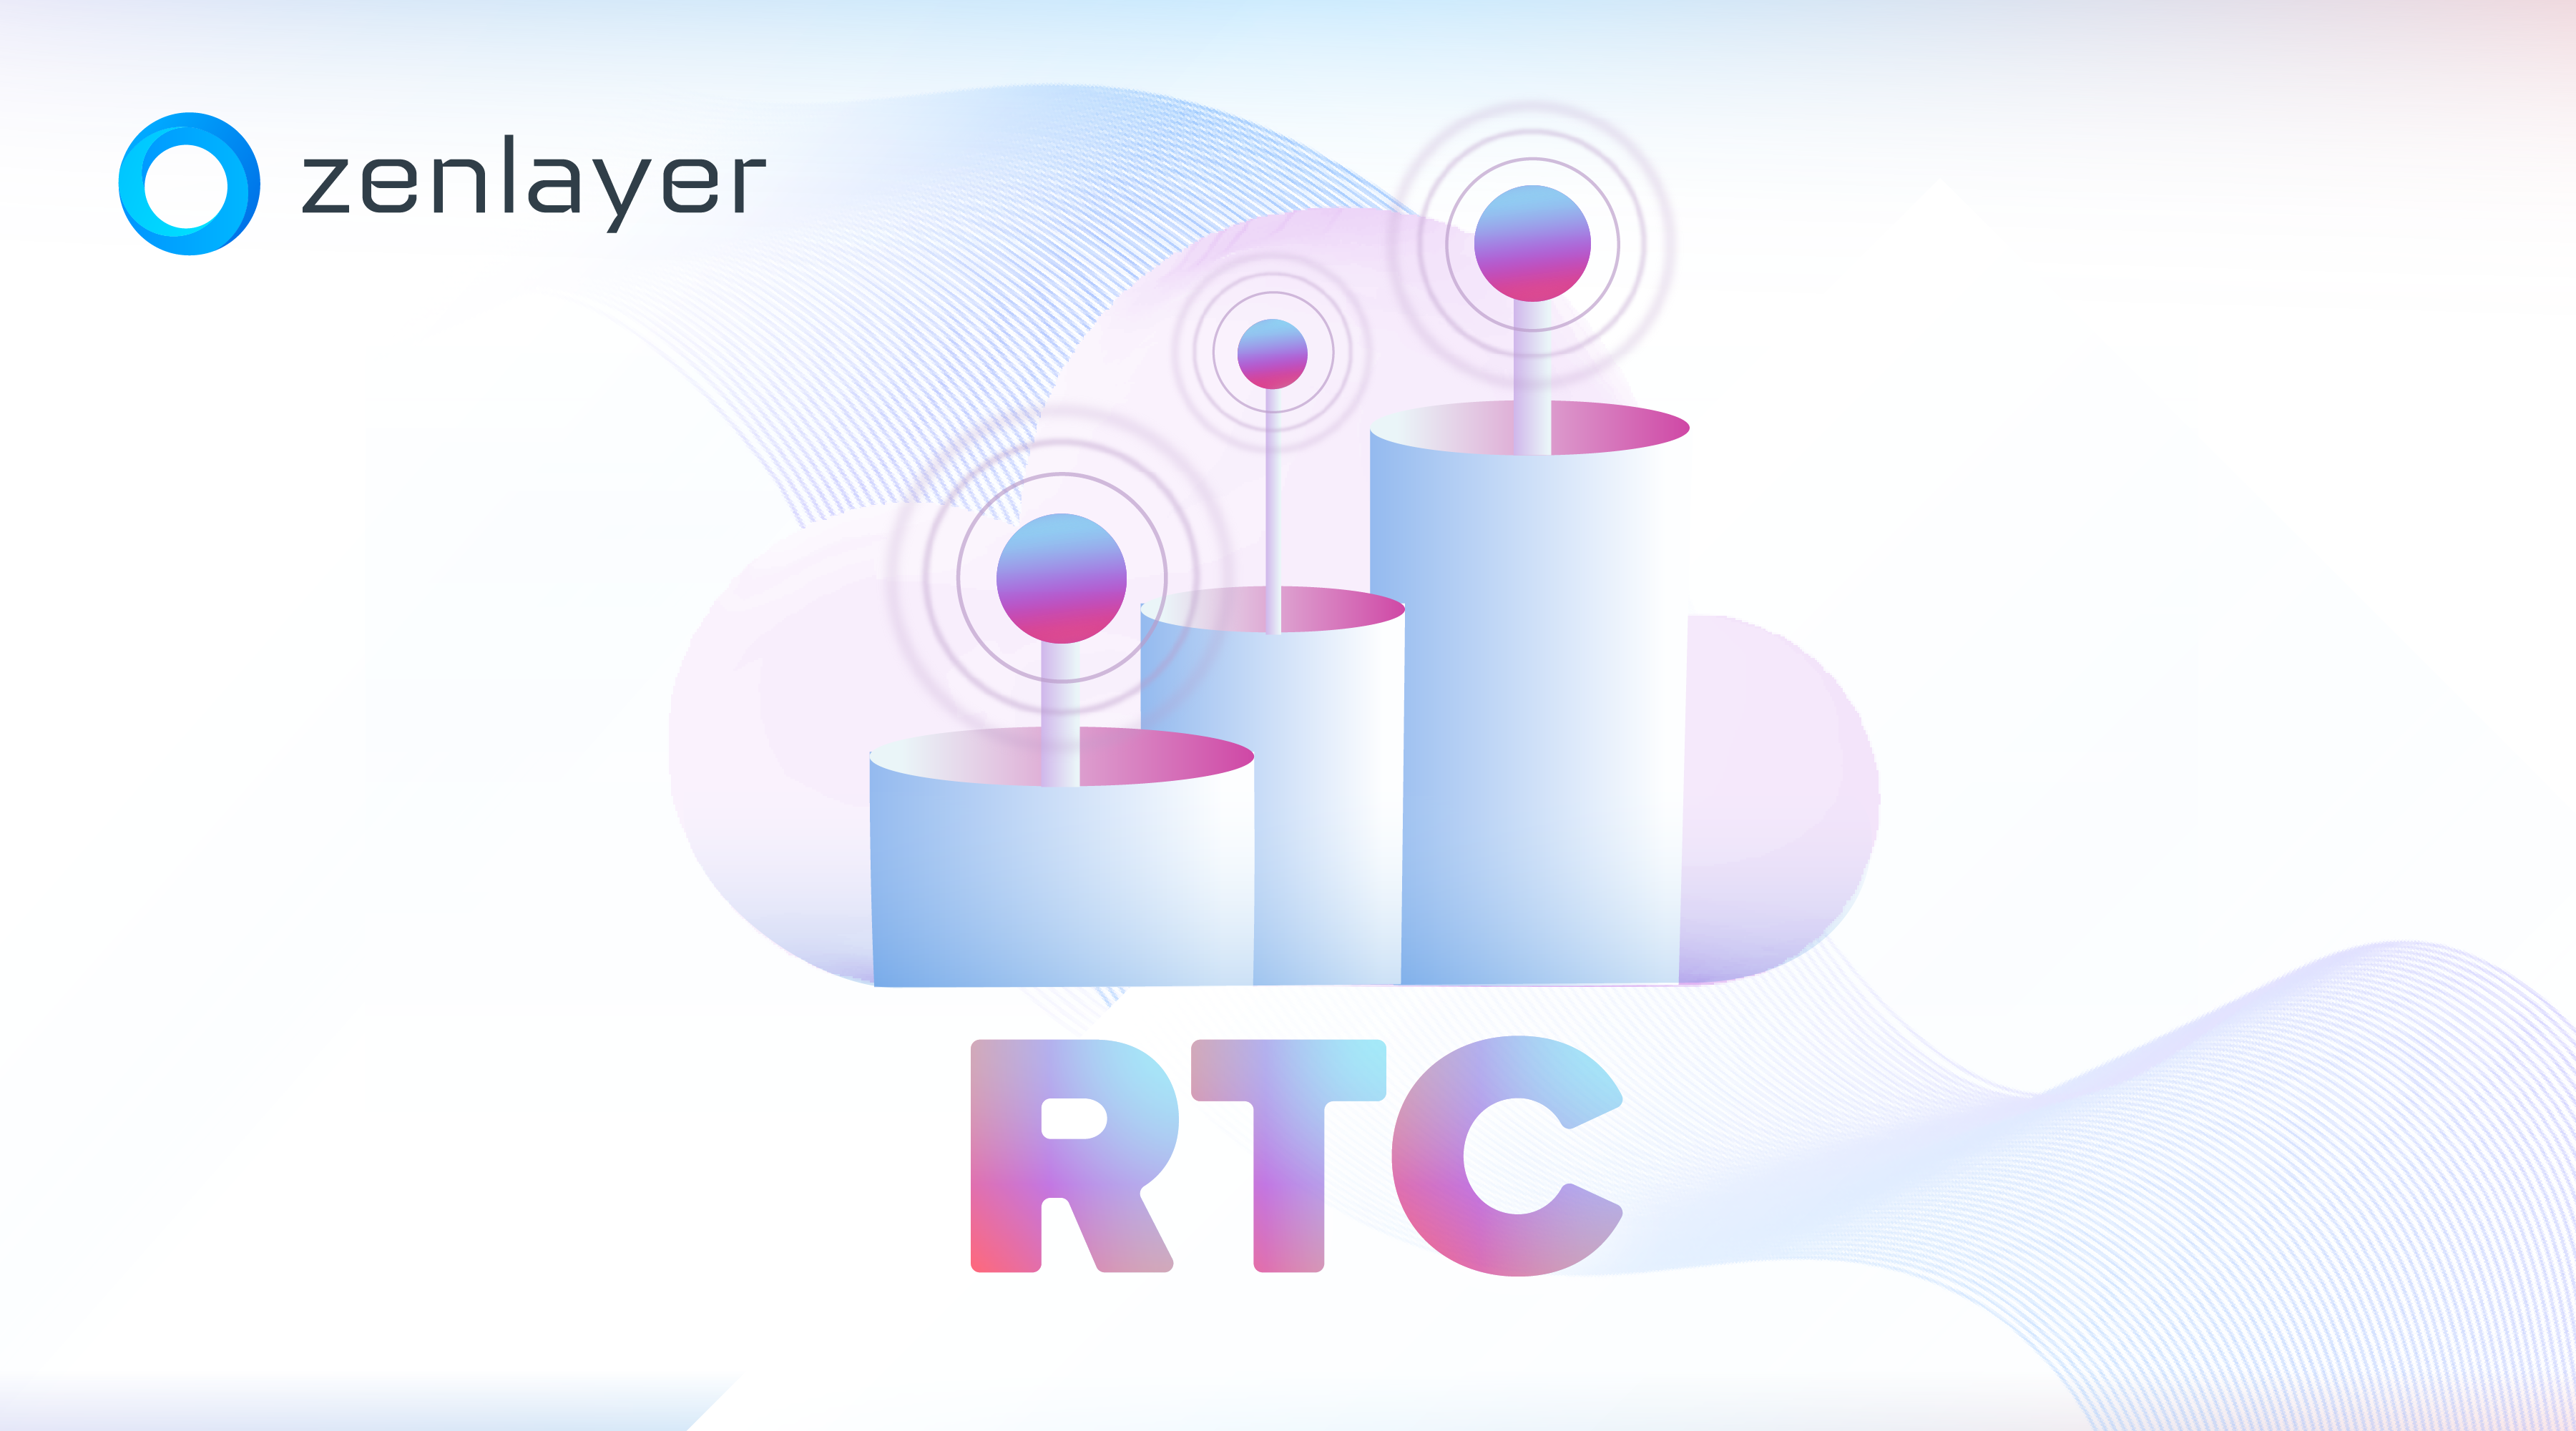 Building a Global RTC Service - Part 2: Overcoming RTC Challenges